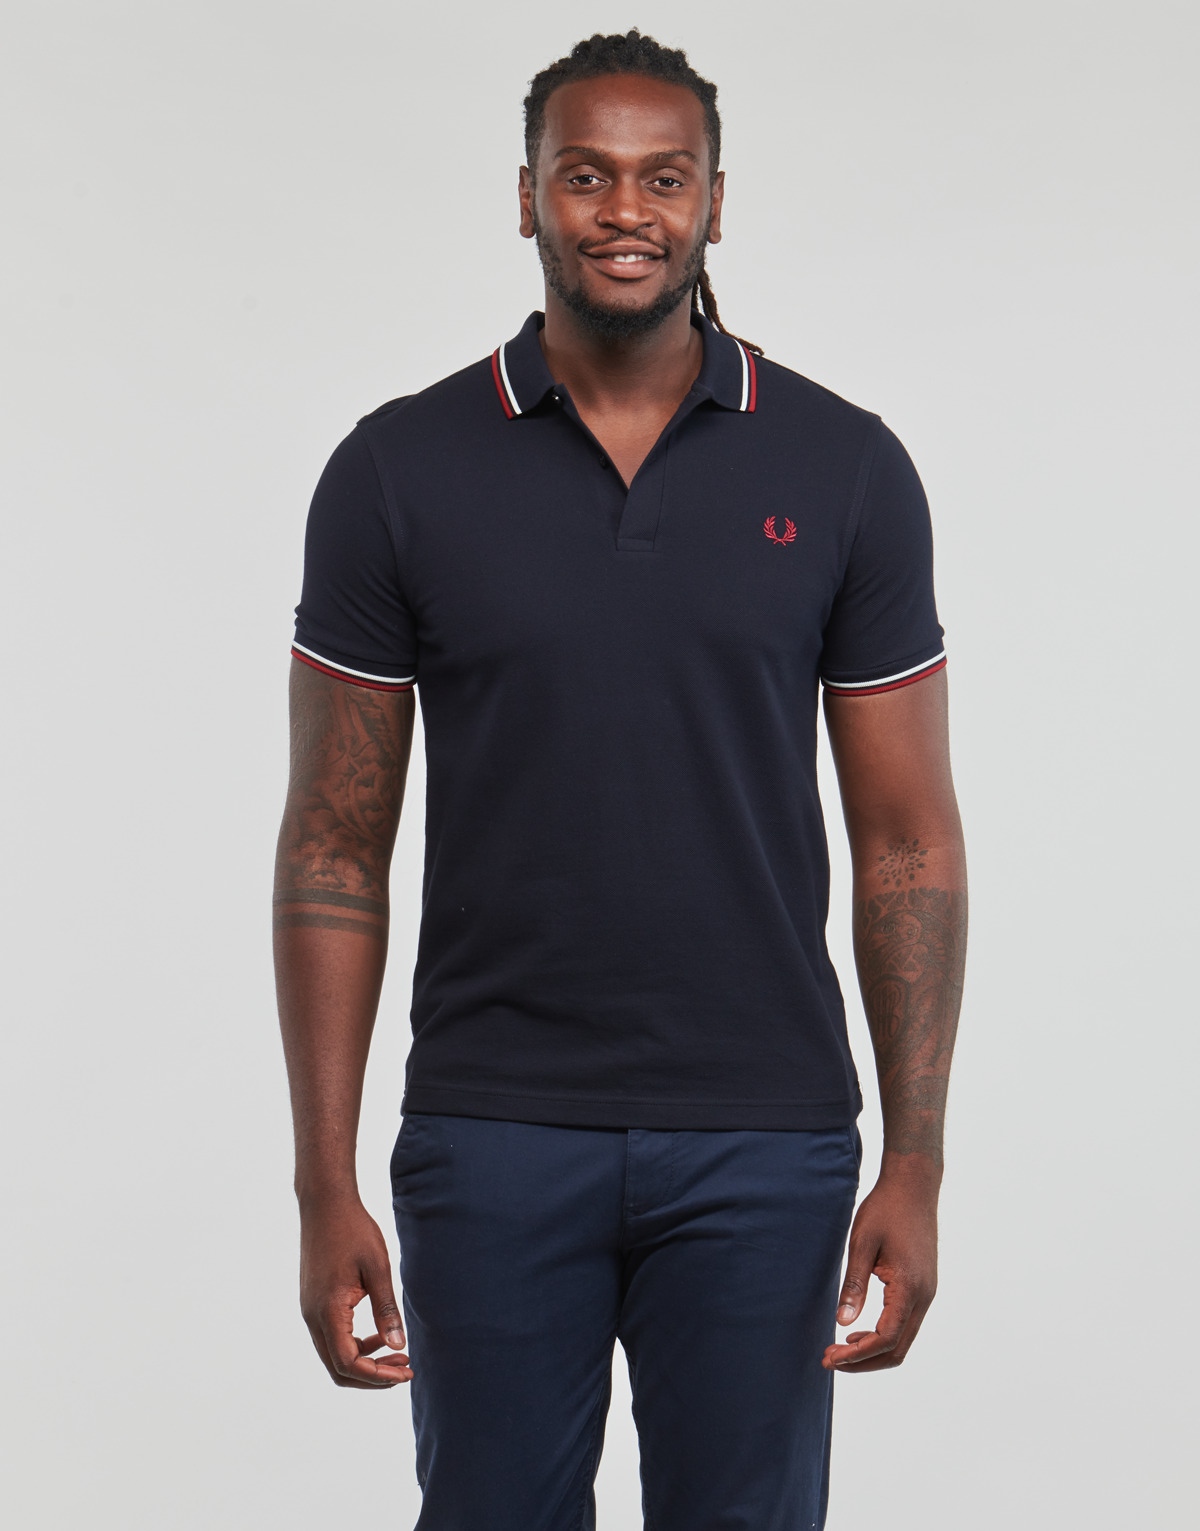 Fred Perry Marine / Blanc / Rouge TWIN TIPPED FRED PERRY SHIRT far6jyB2